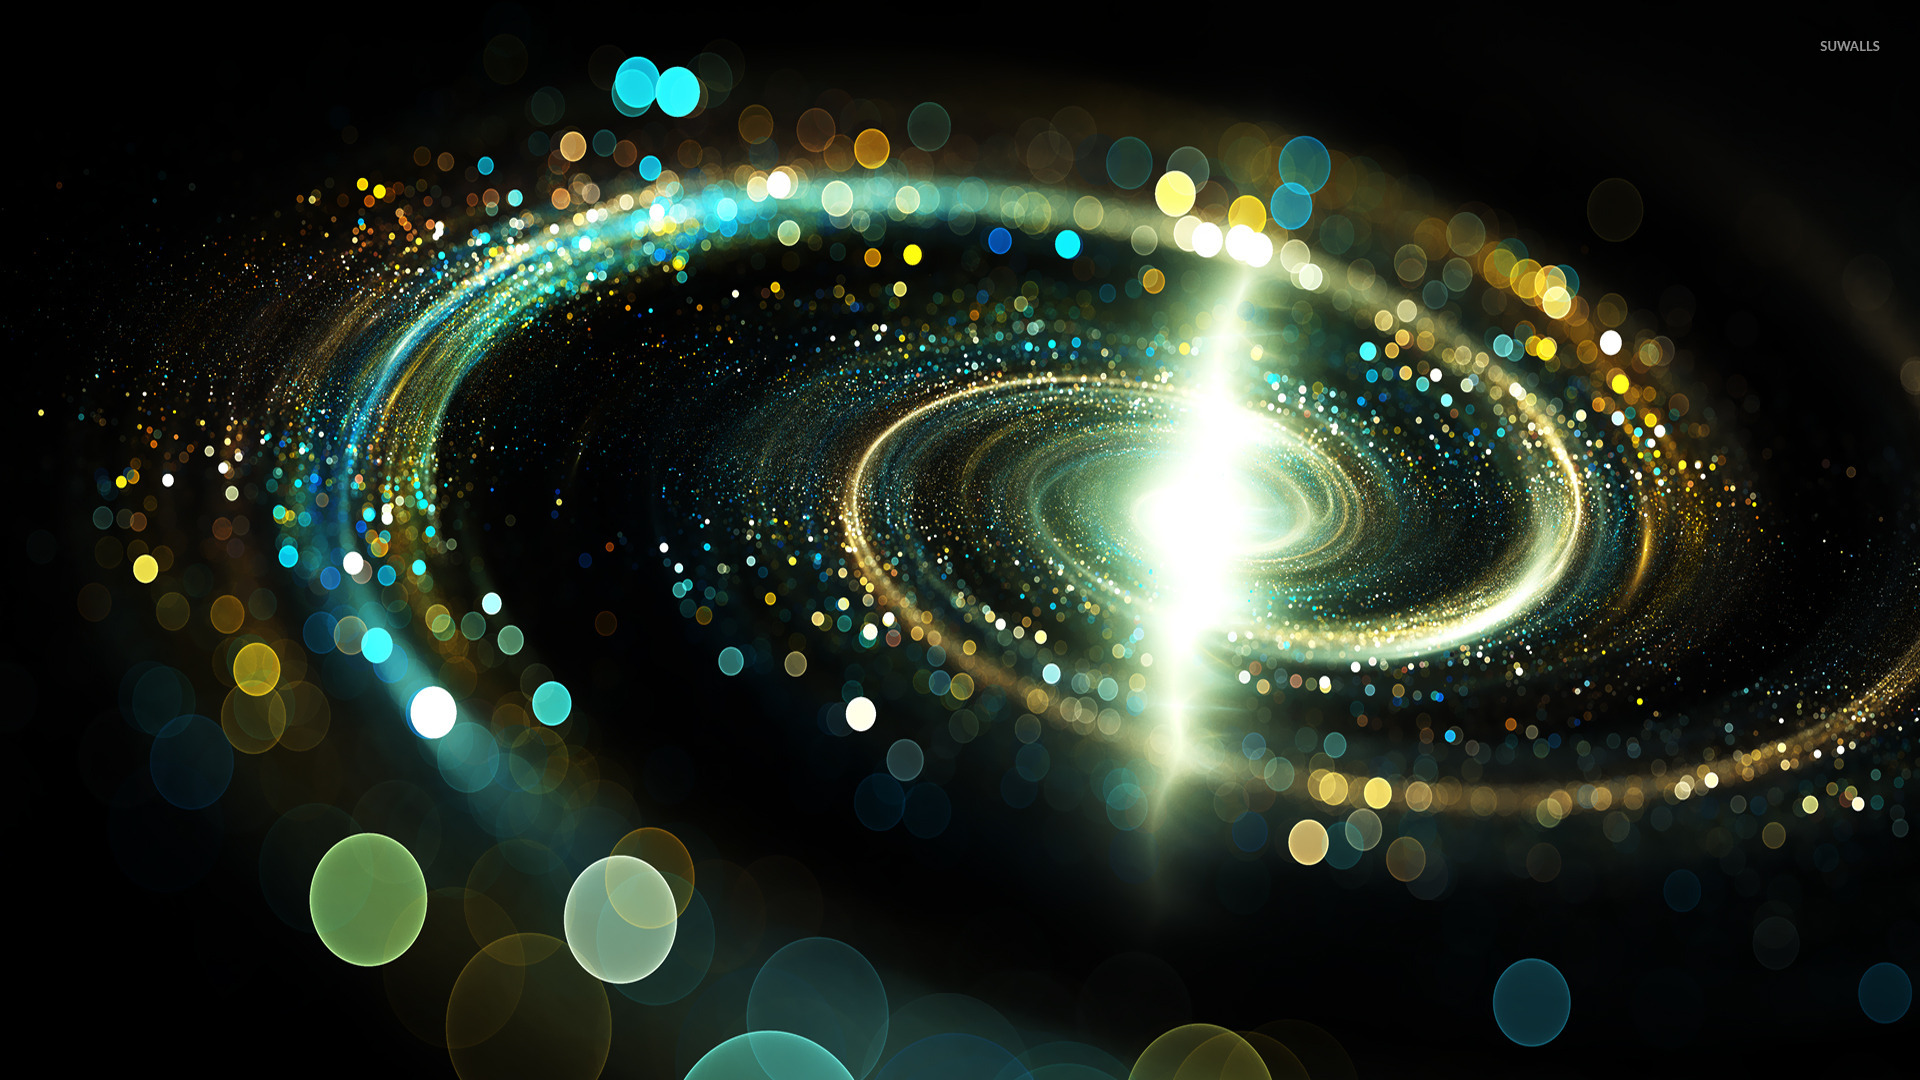 Glowing spiral wallpaper - Abstract wallpapers - #21904